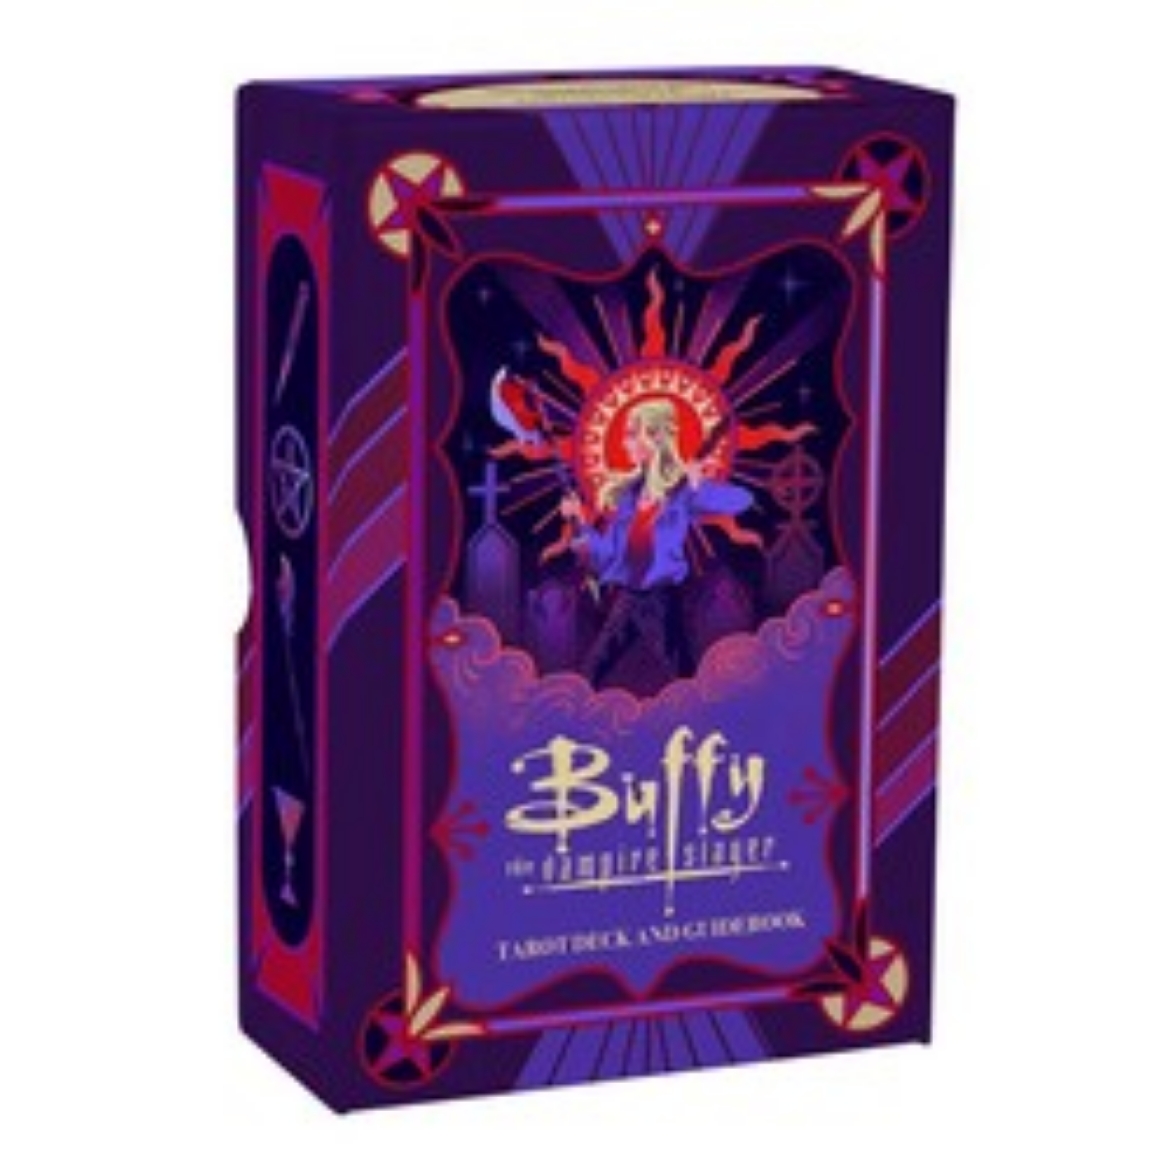 Picture of Buffy the Vampire Slayer Tarot Deck and Guidebook